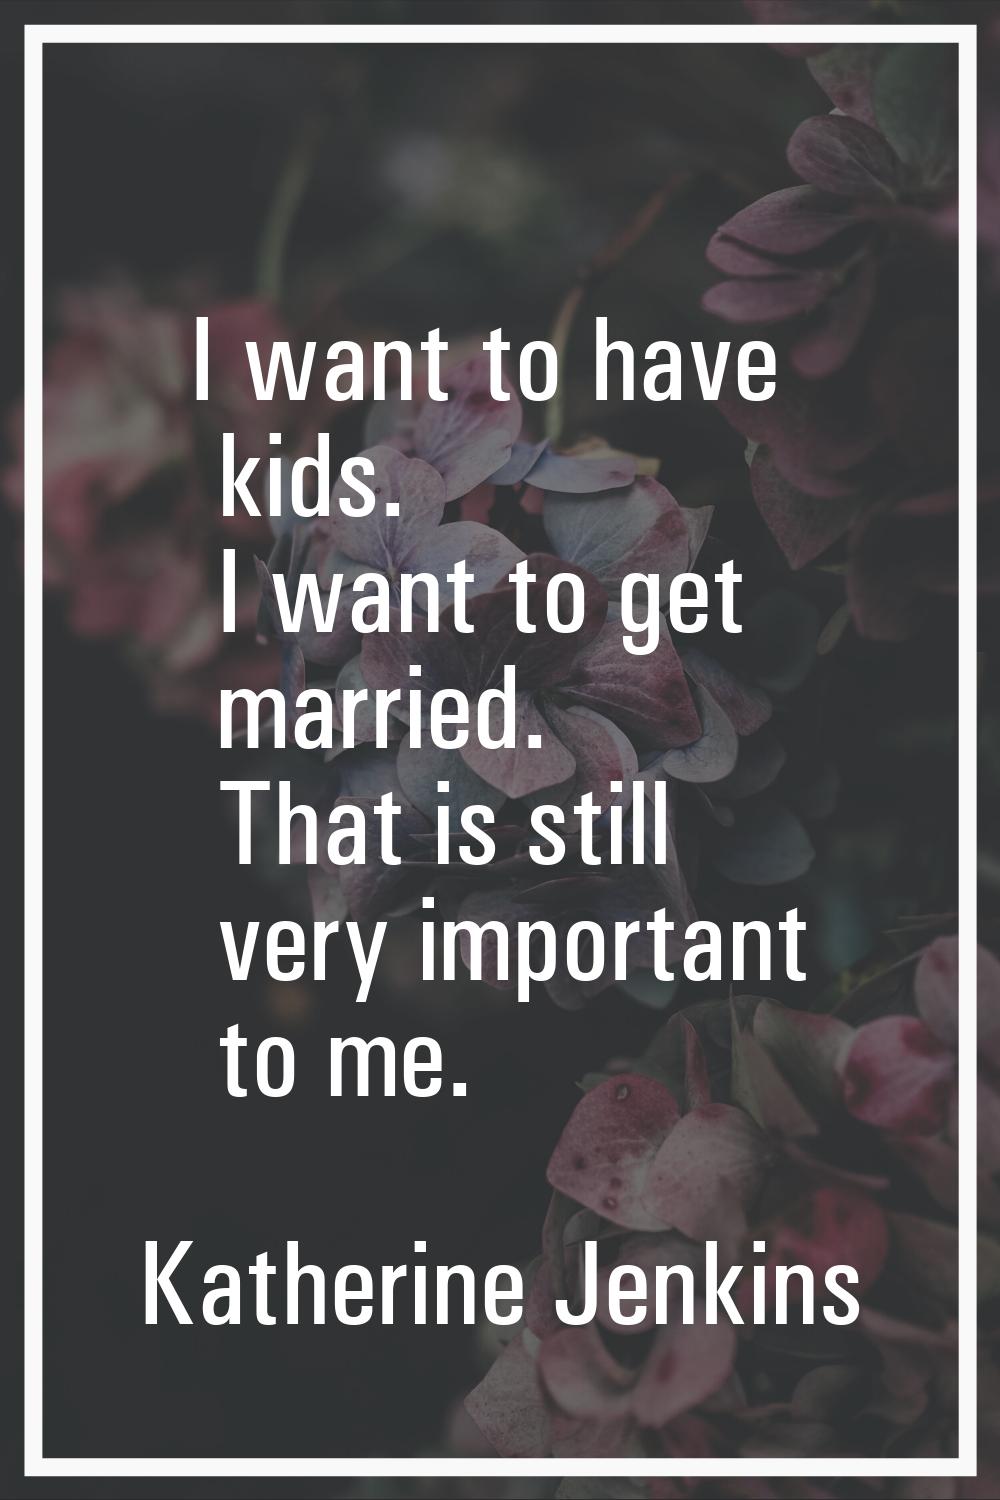 I want to have kids. I want to get married. That is still very important to me.